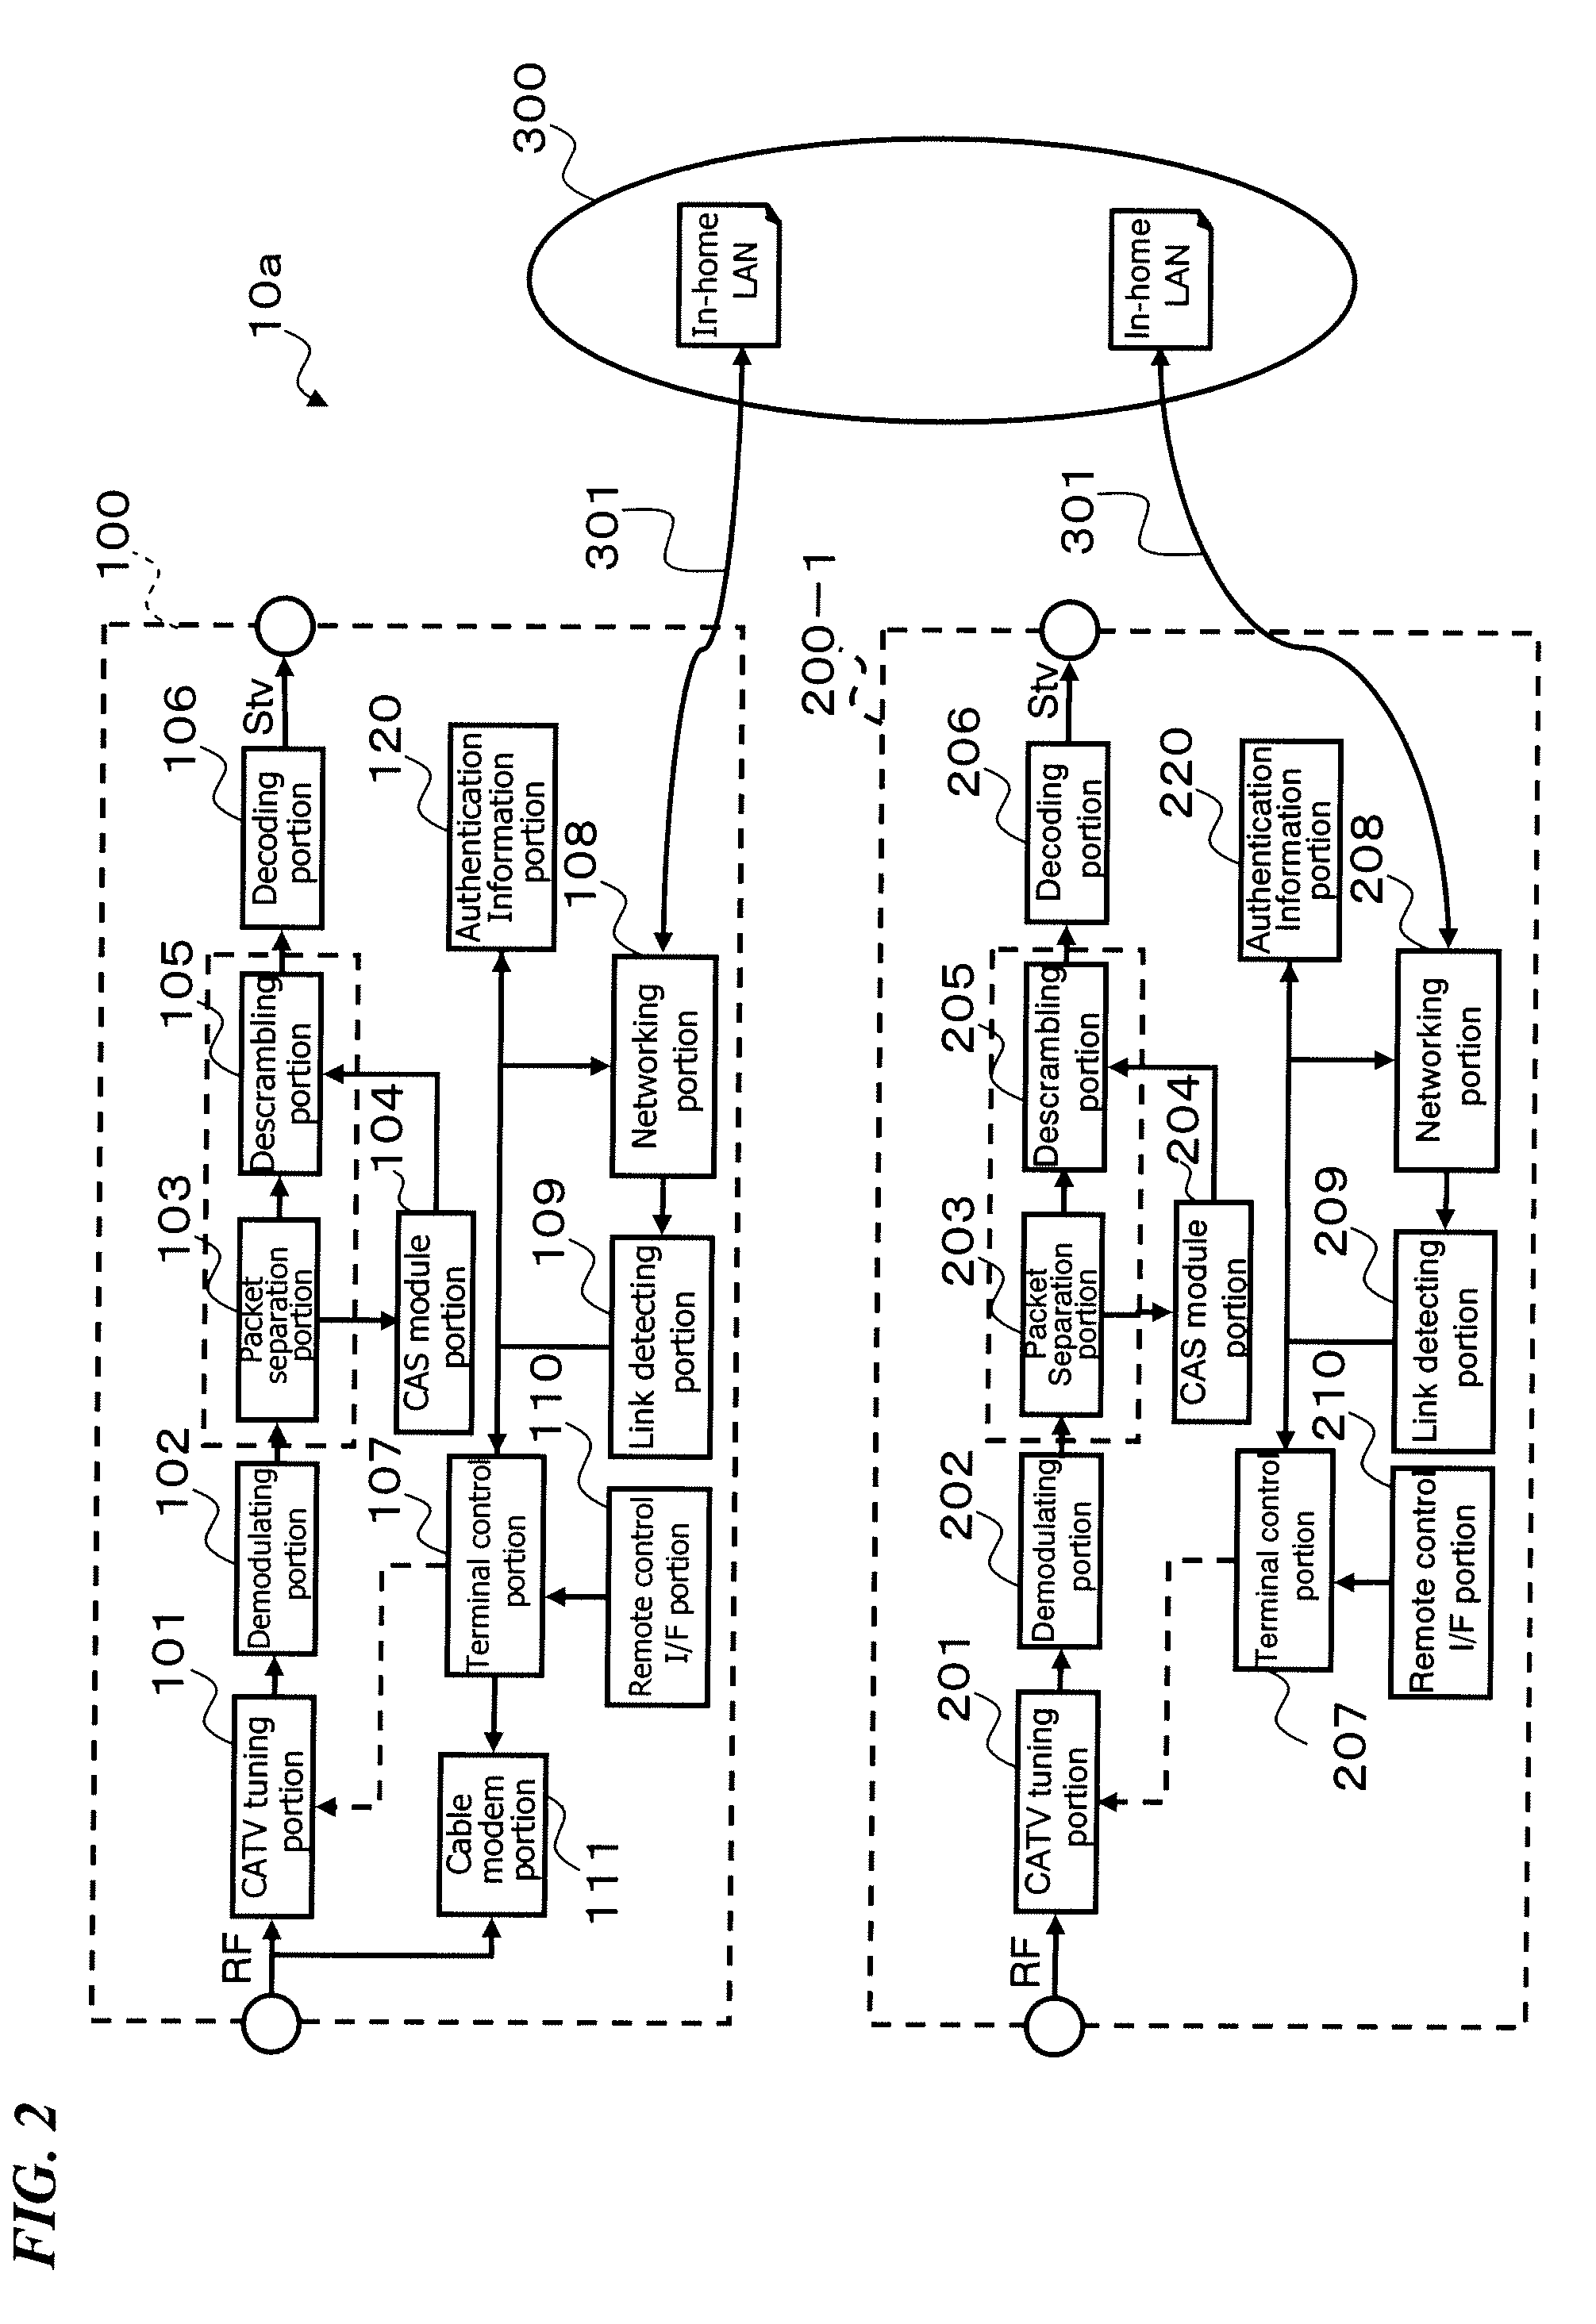 In-home receiving terminal system